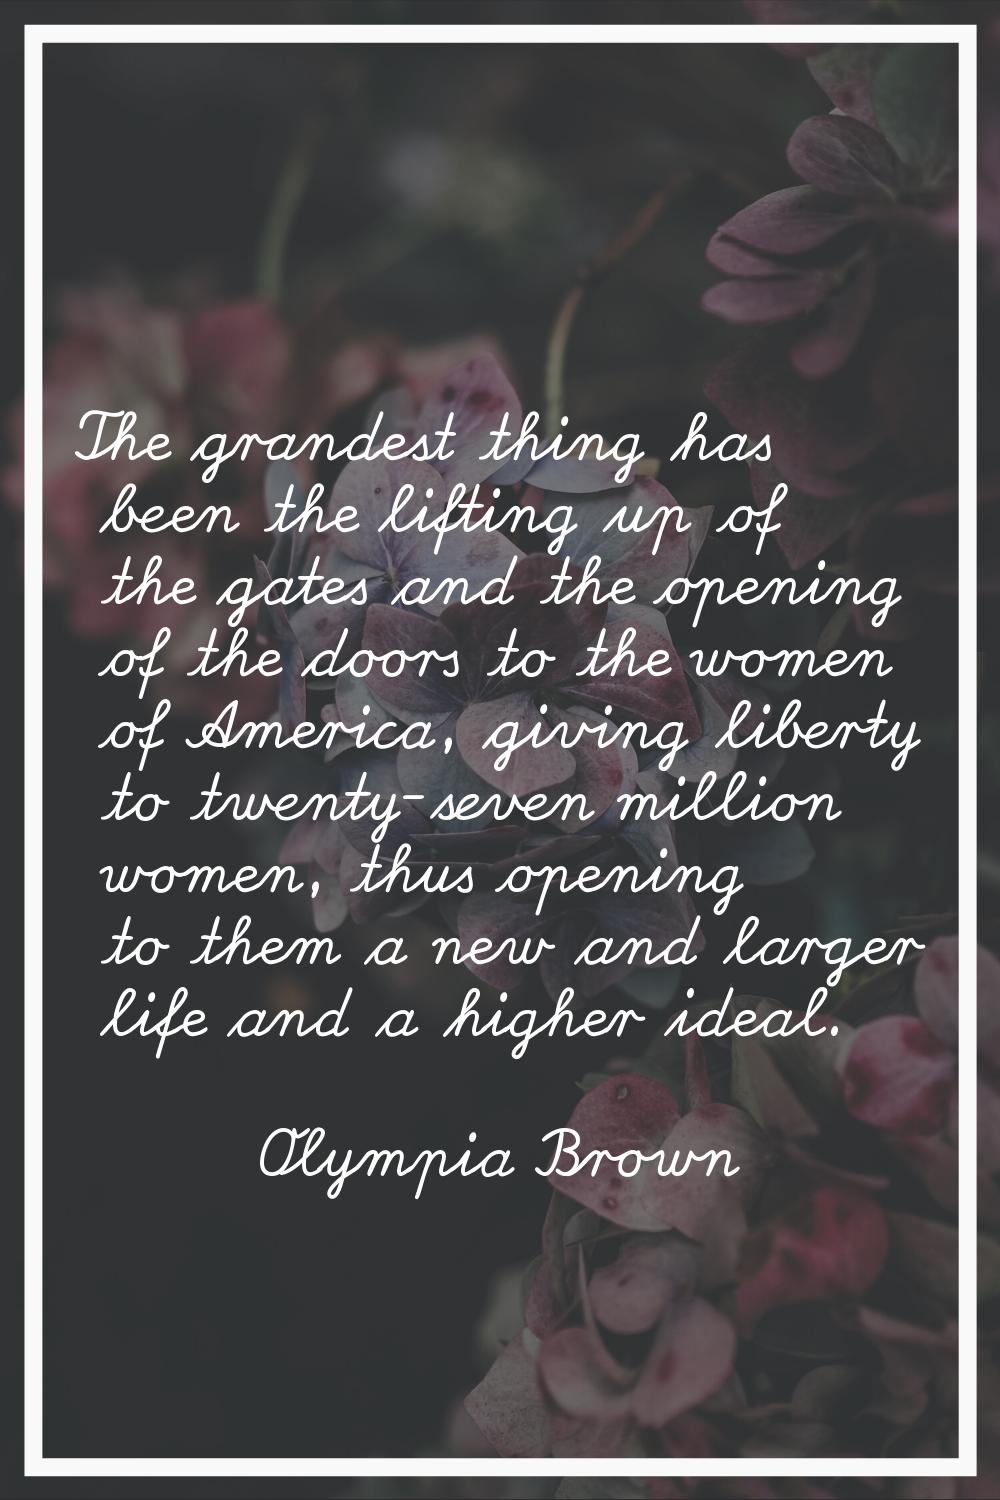 The grandest thing has been the lifting up of the gates and the opening of the doors to the women o